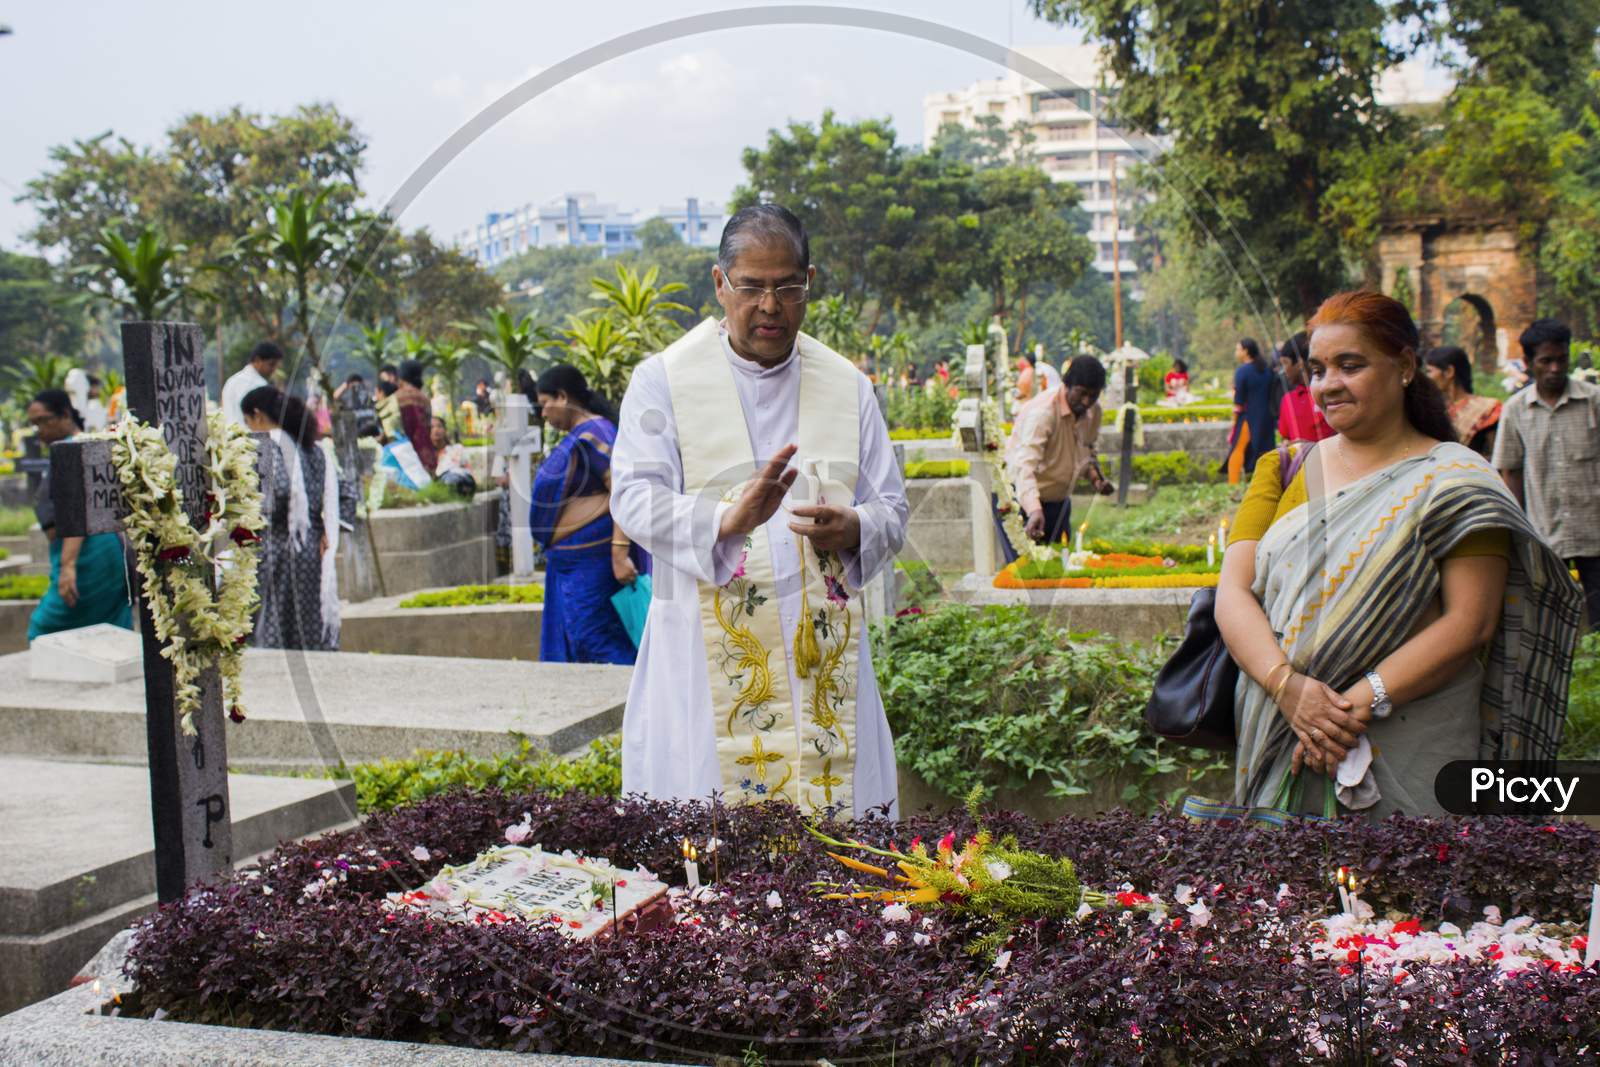 on all souls day, christian people come to cemetery to remember their ancestors as a ritual